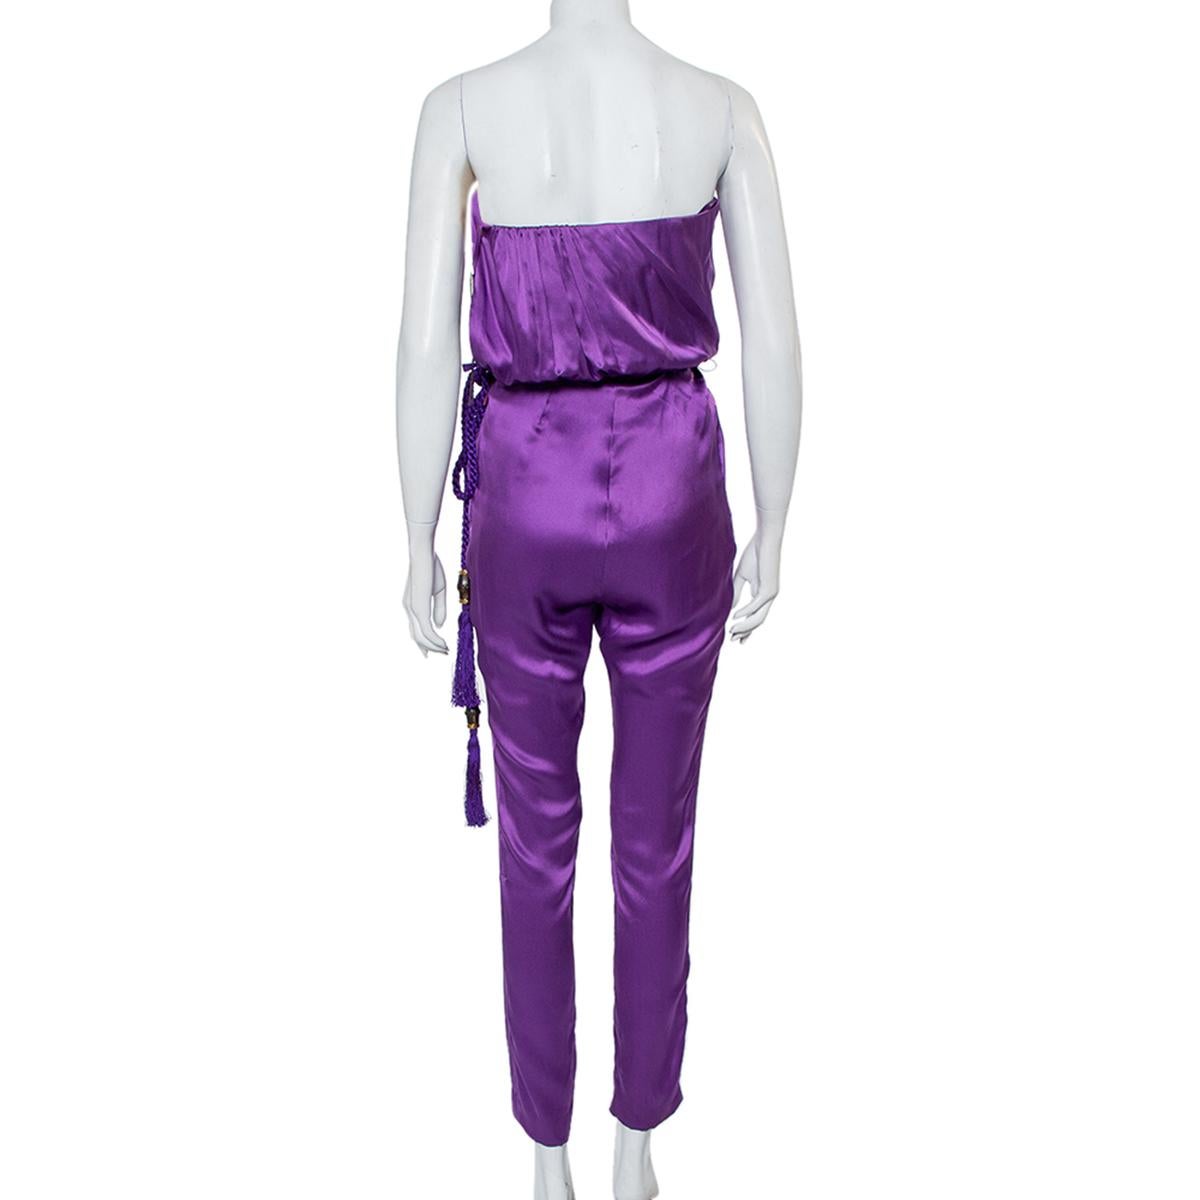 Gucci's purple silk jumpsuit with a tasseled belt is your way to statement '70s glamour. The strapless silhouette allows you to play with statement accessories. It is further made comfortable with a zip closure and pockets. This eye-catching piece